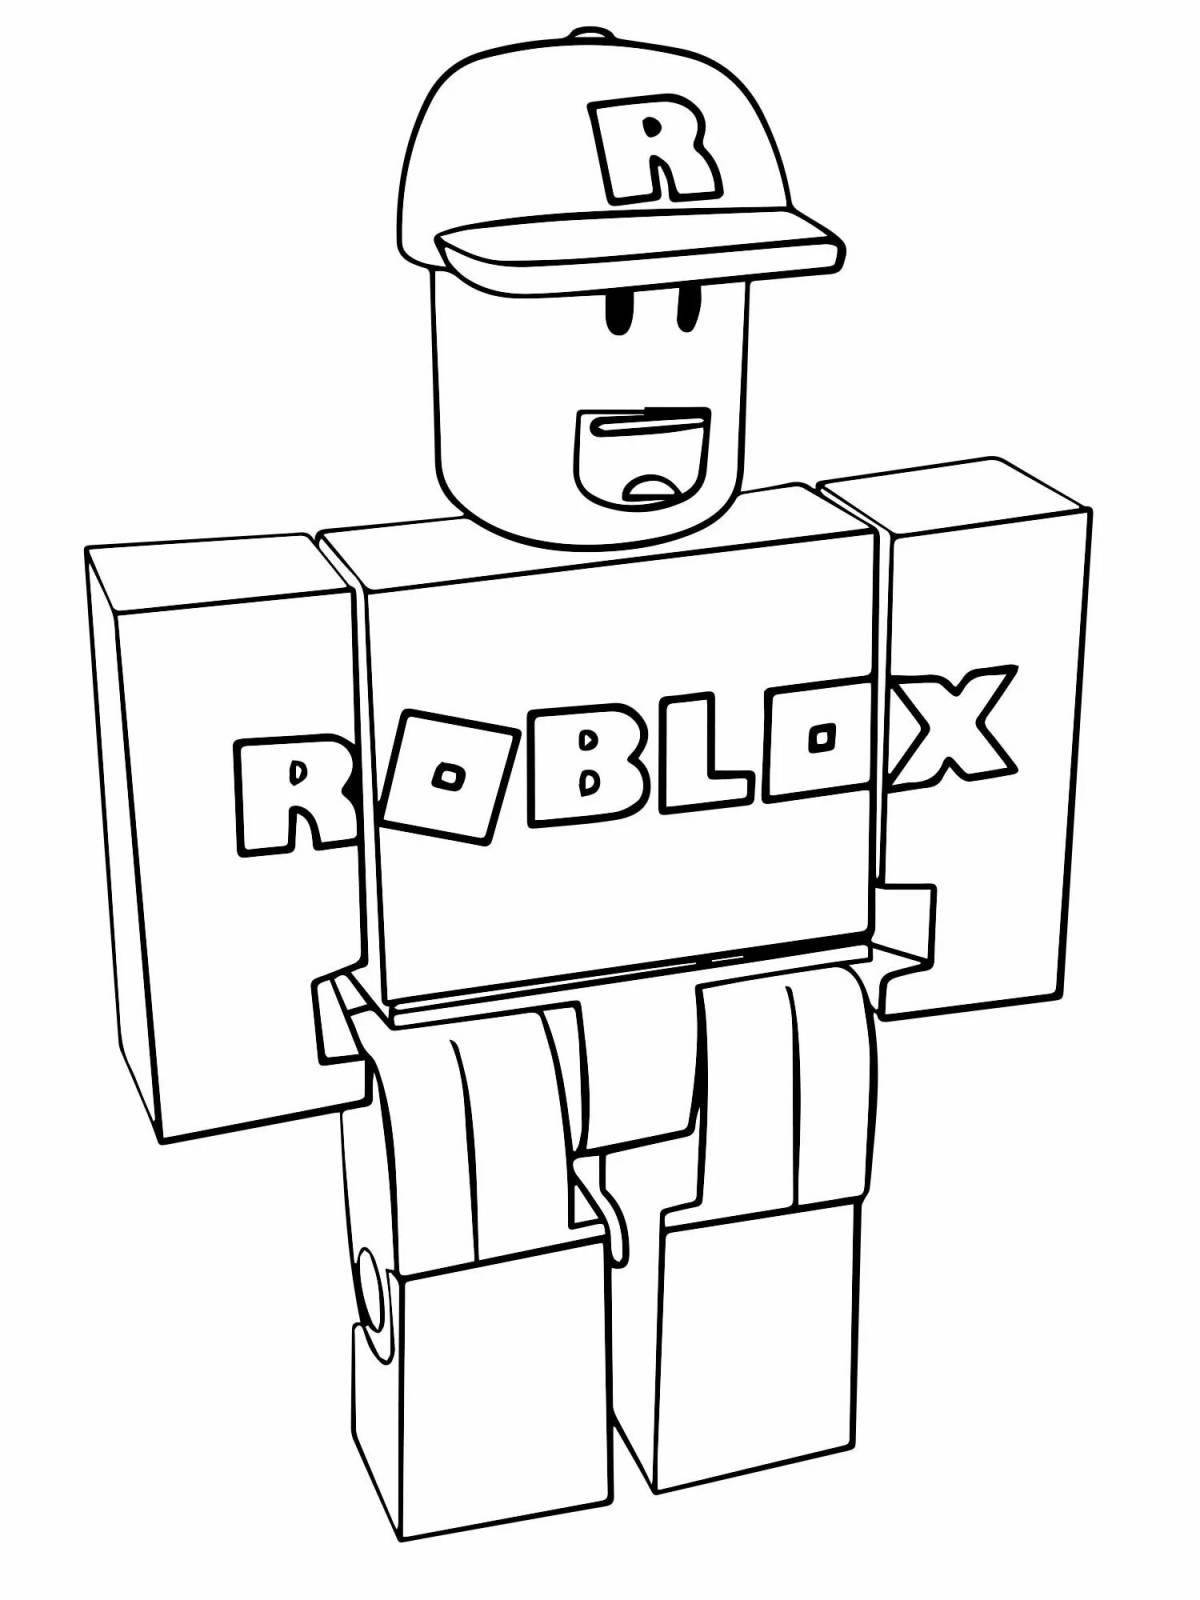 Roblox dynamic heroes coloring page